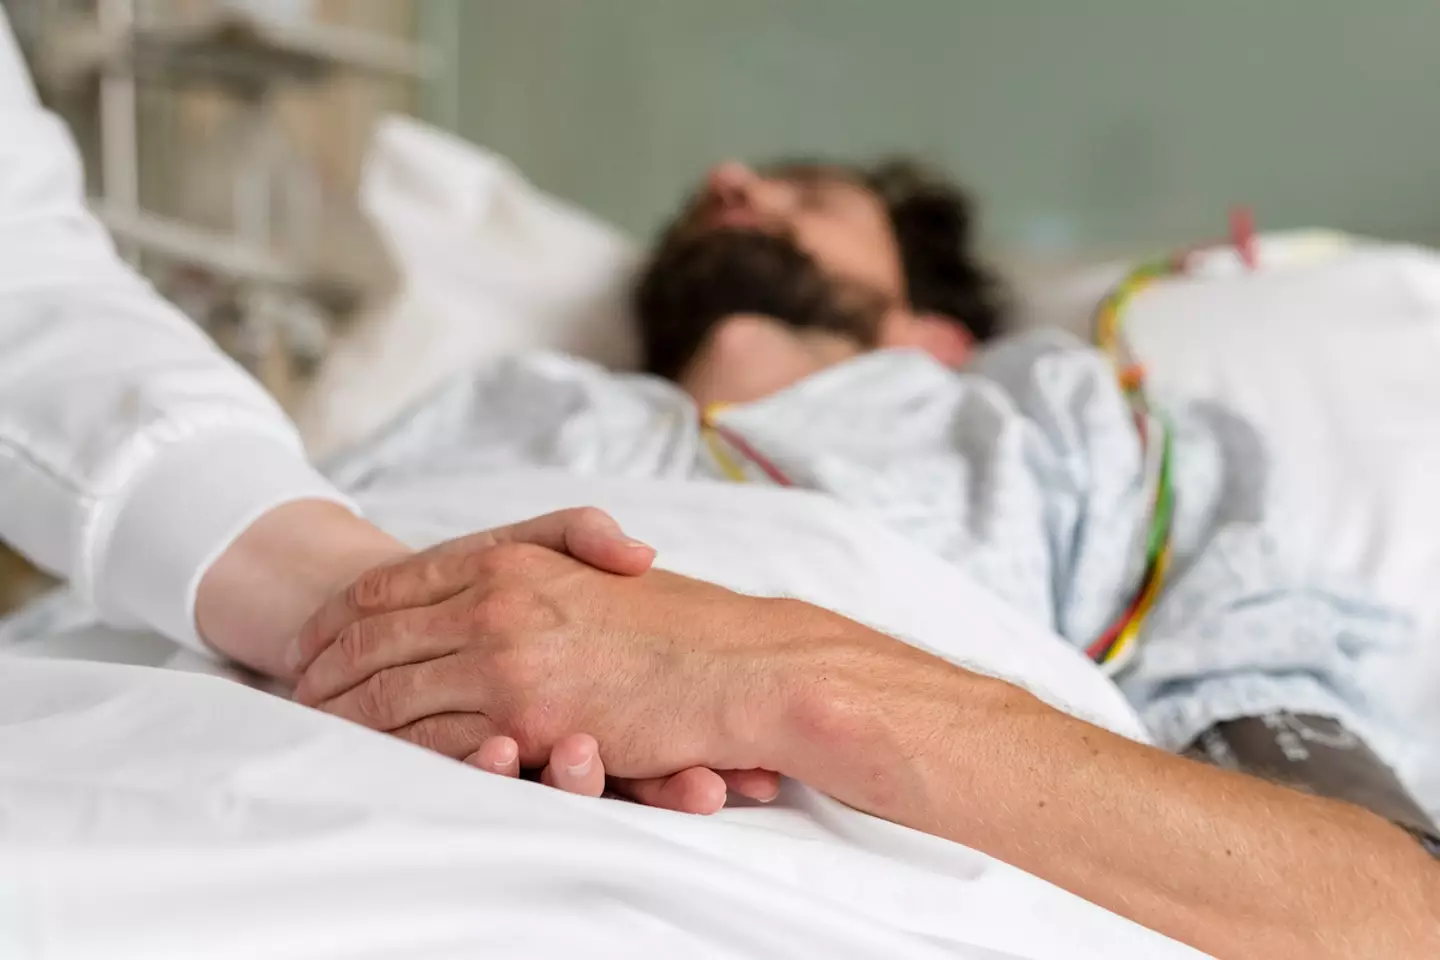 There is a long process for patients to go through before going through the assisted suicide. (Getty Stock Photo)